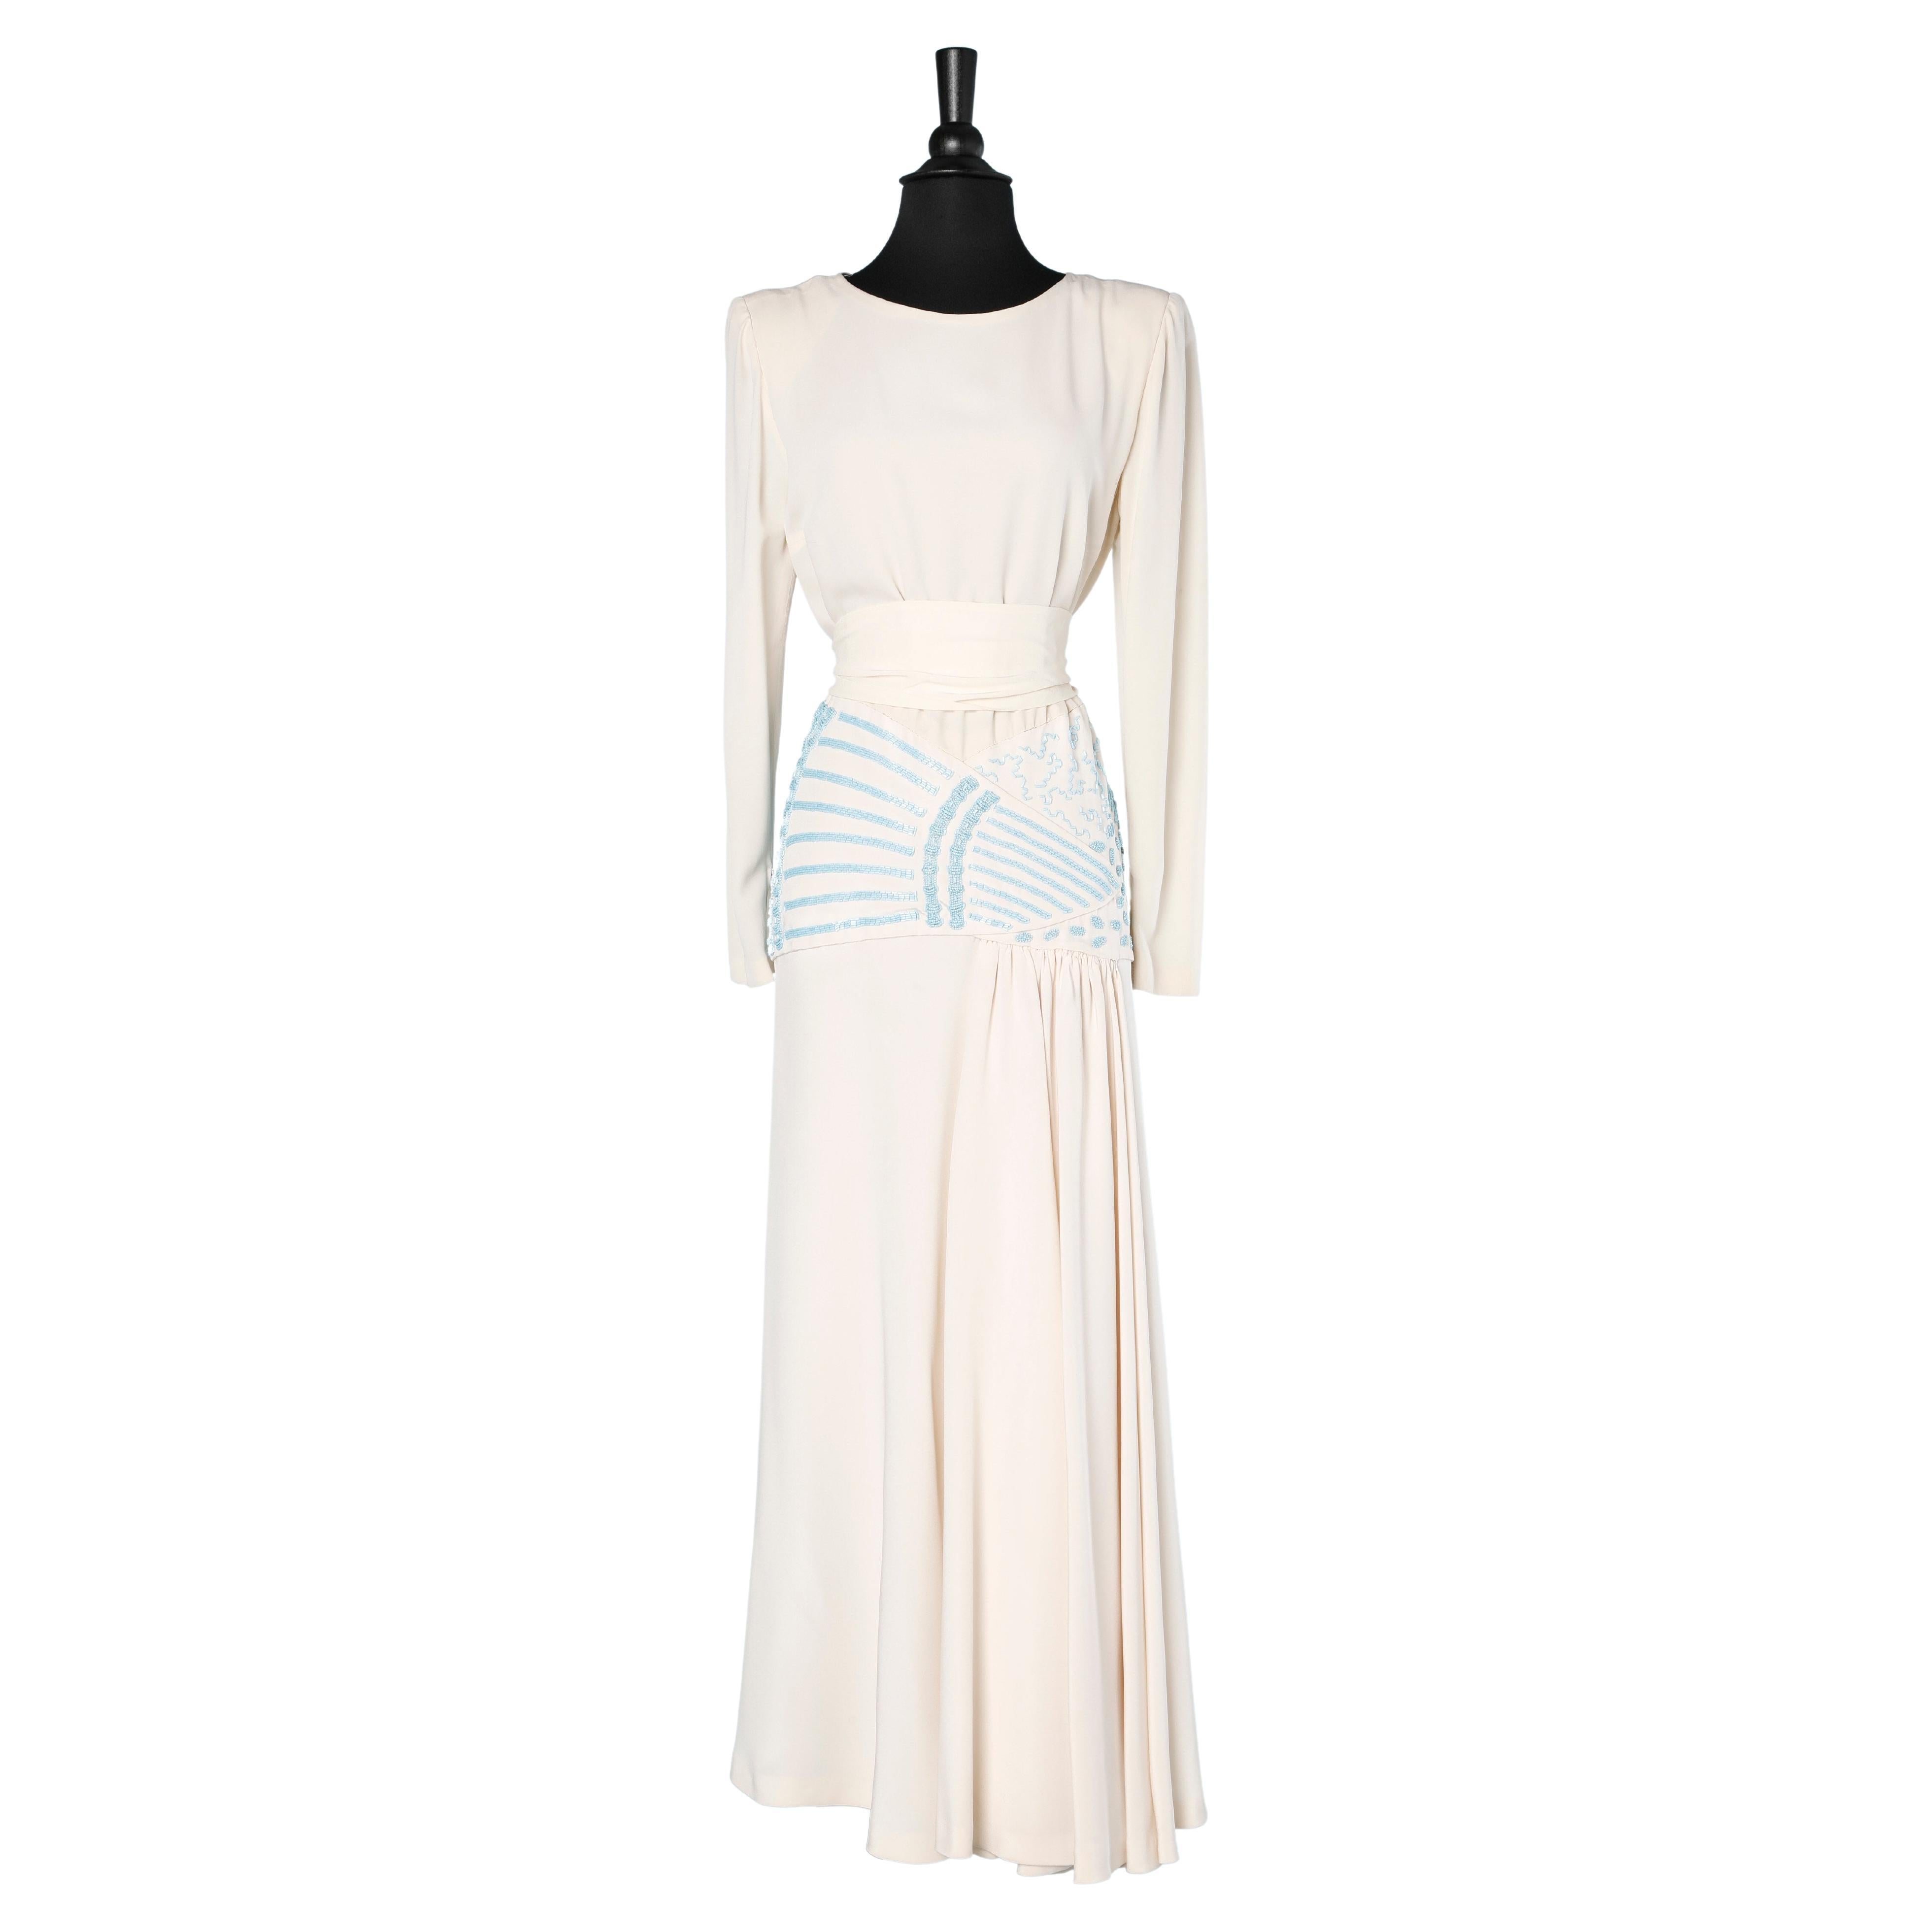 Ivory silk crêpe dress with turquoise blue beadwork and belt